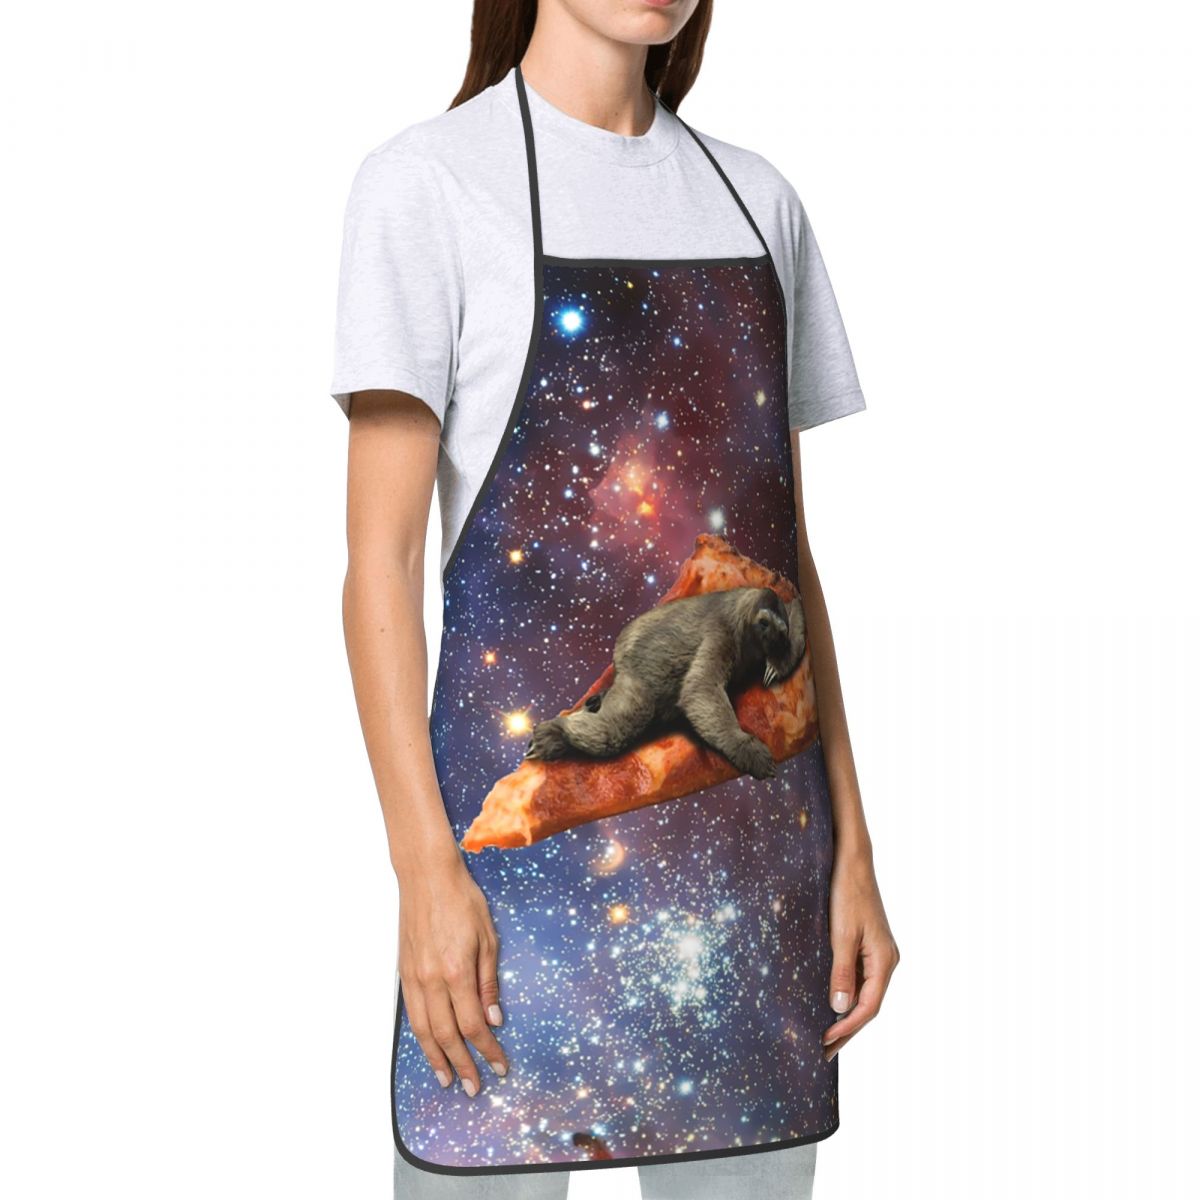 The Space Pizza Sloth Aprons